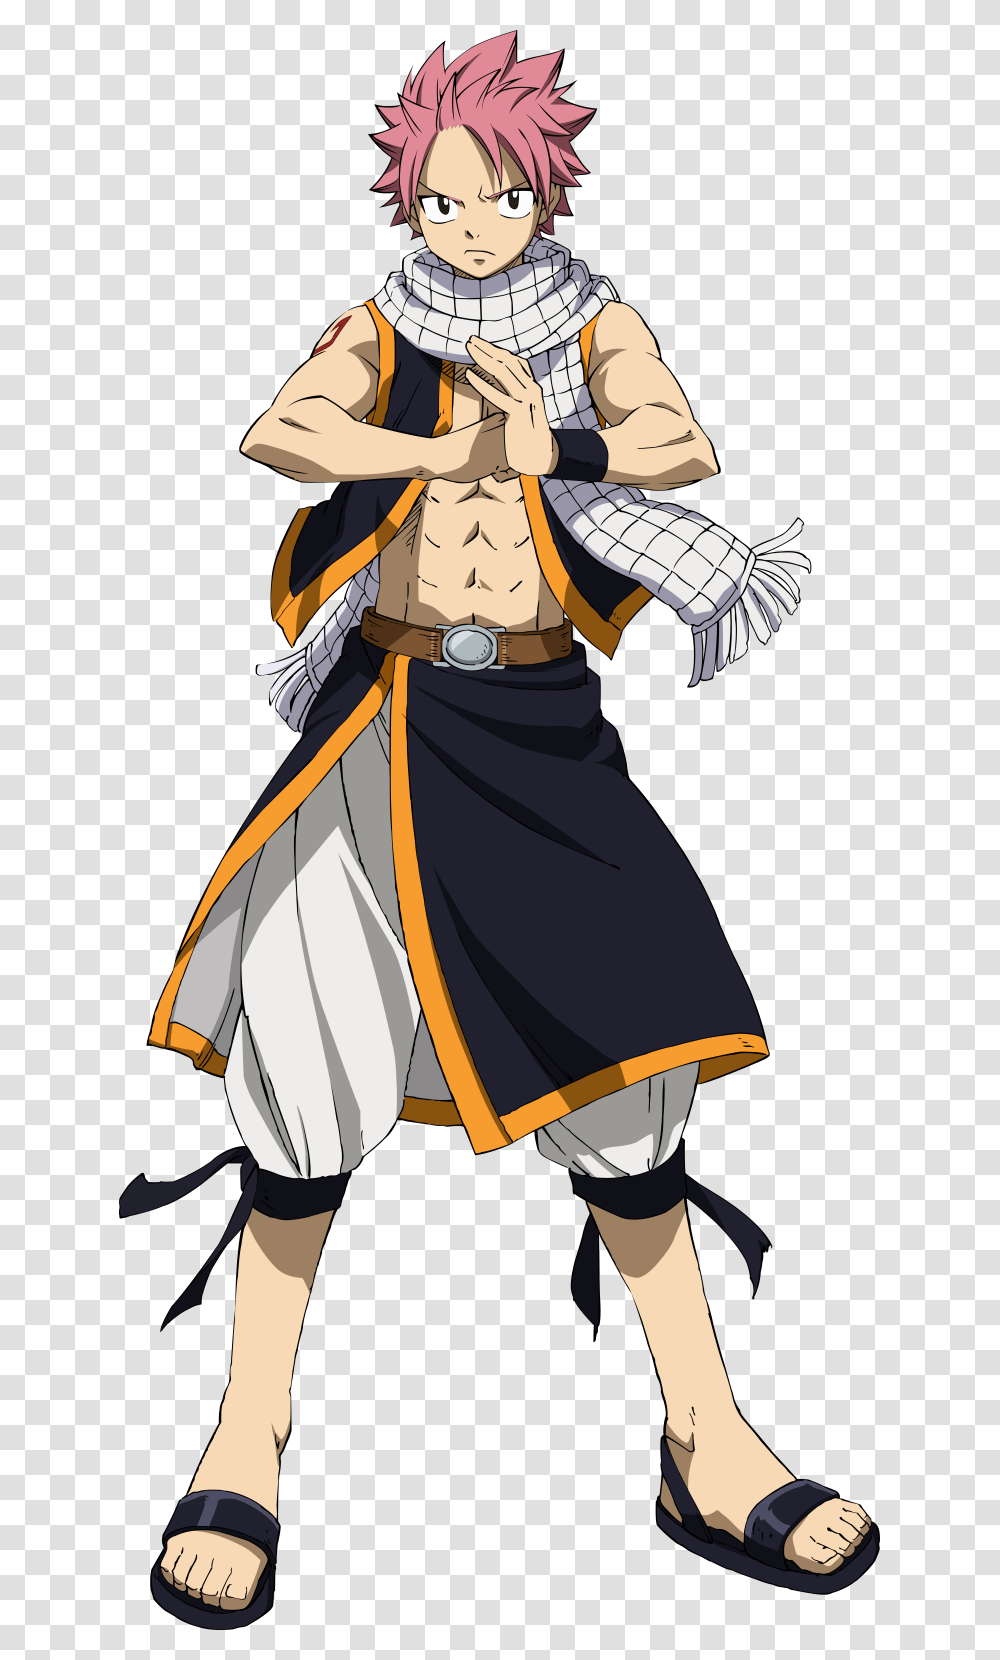 Fairy Tail Natsu Dragneel Cosplay Costume Download Fairy Tail Natsu Outfit, Person, Manga, Comics Transparent Png